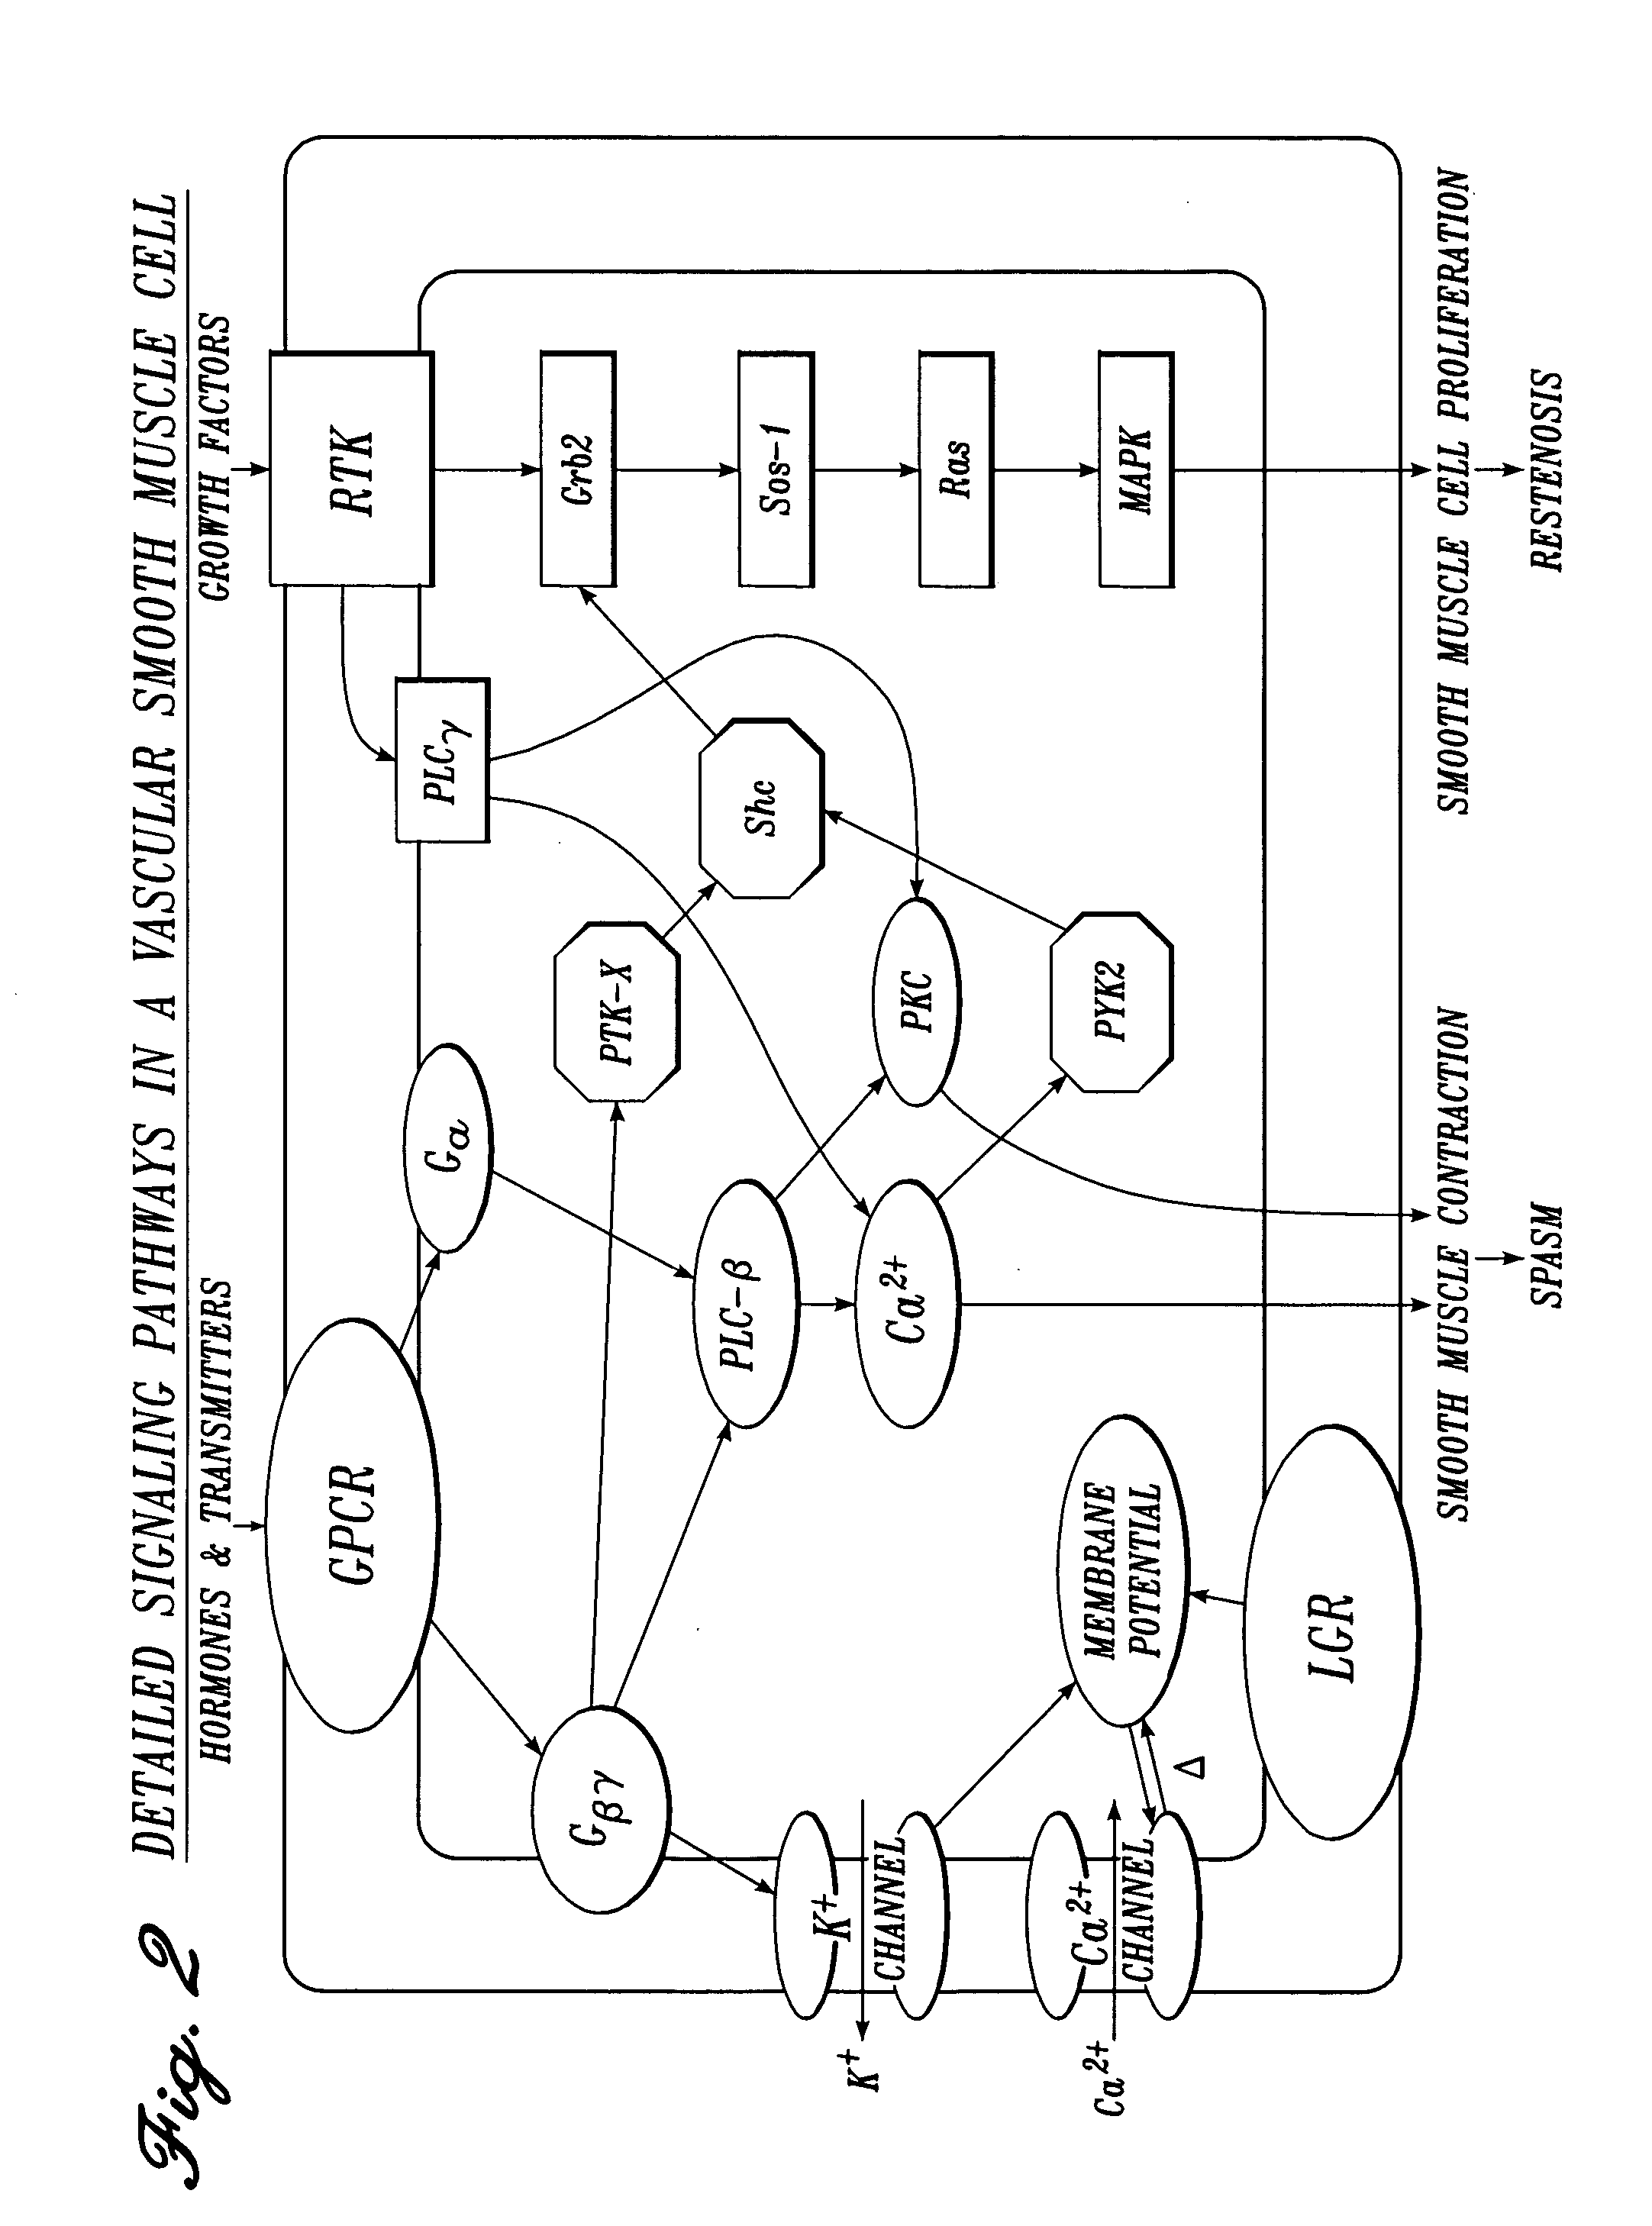 Irrigation solution and method for inhibition of pain and inflammation